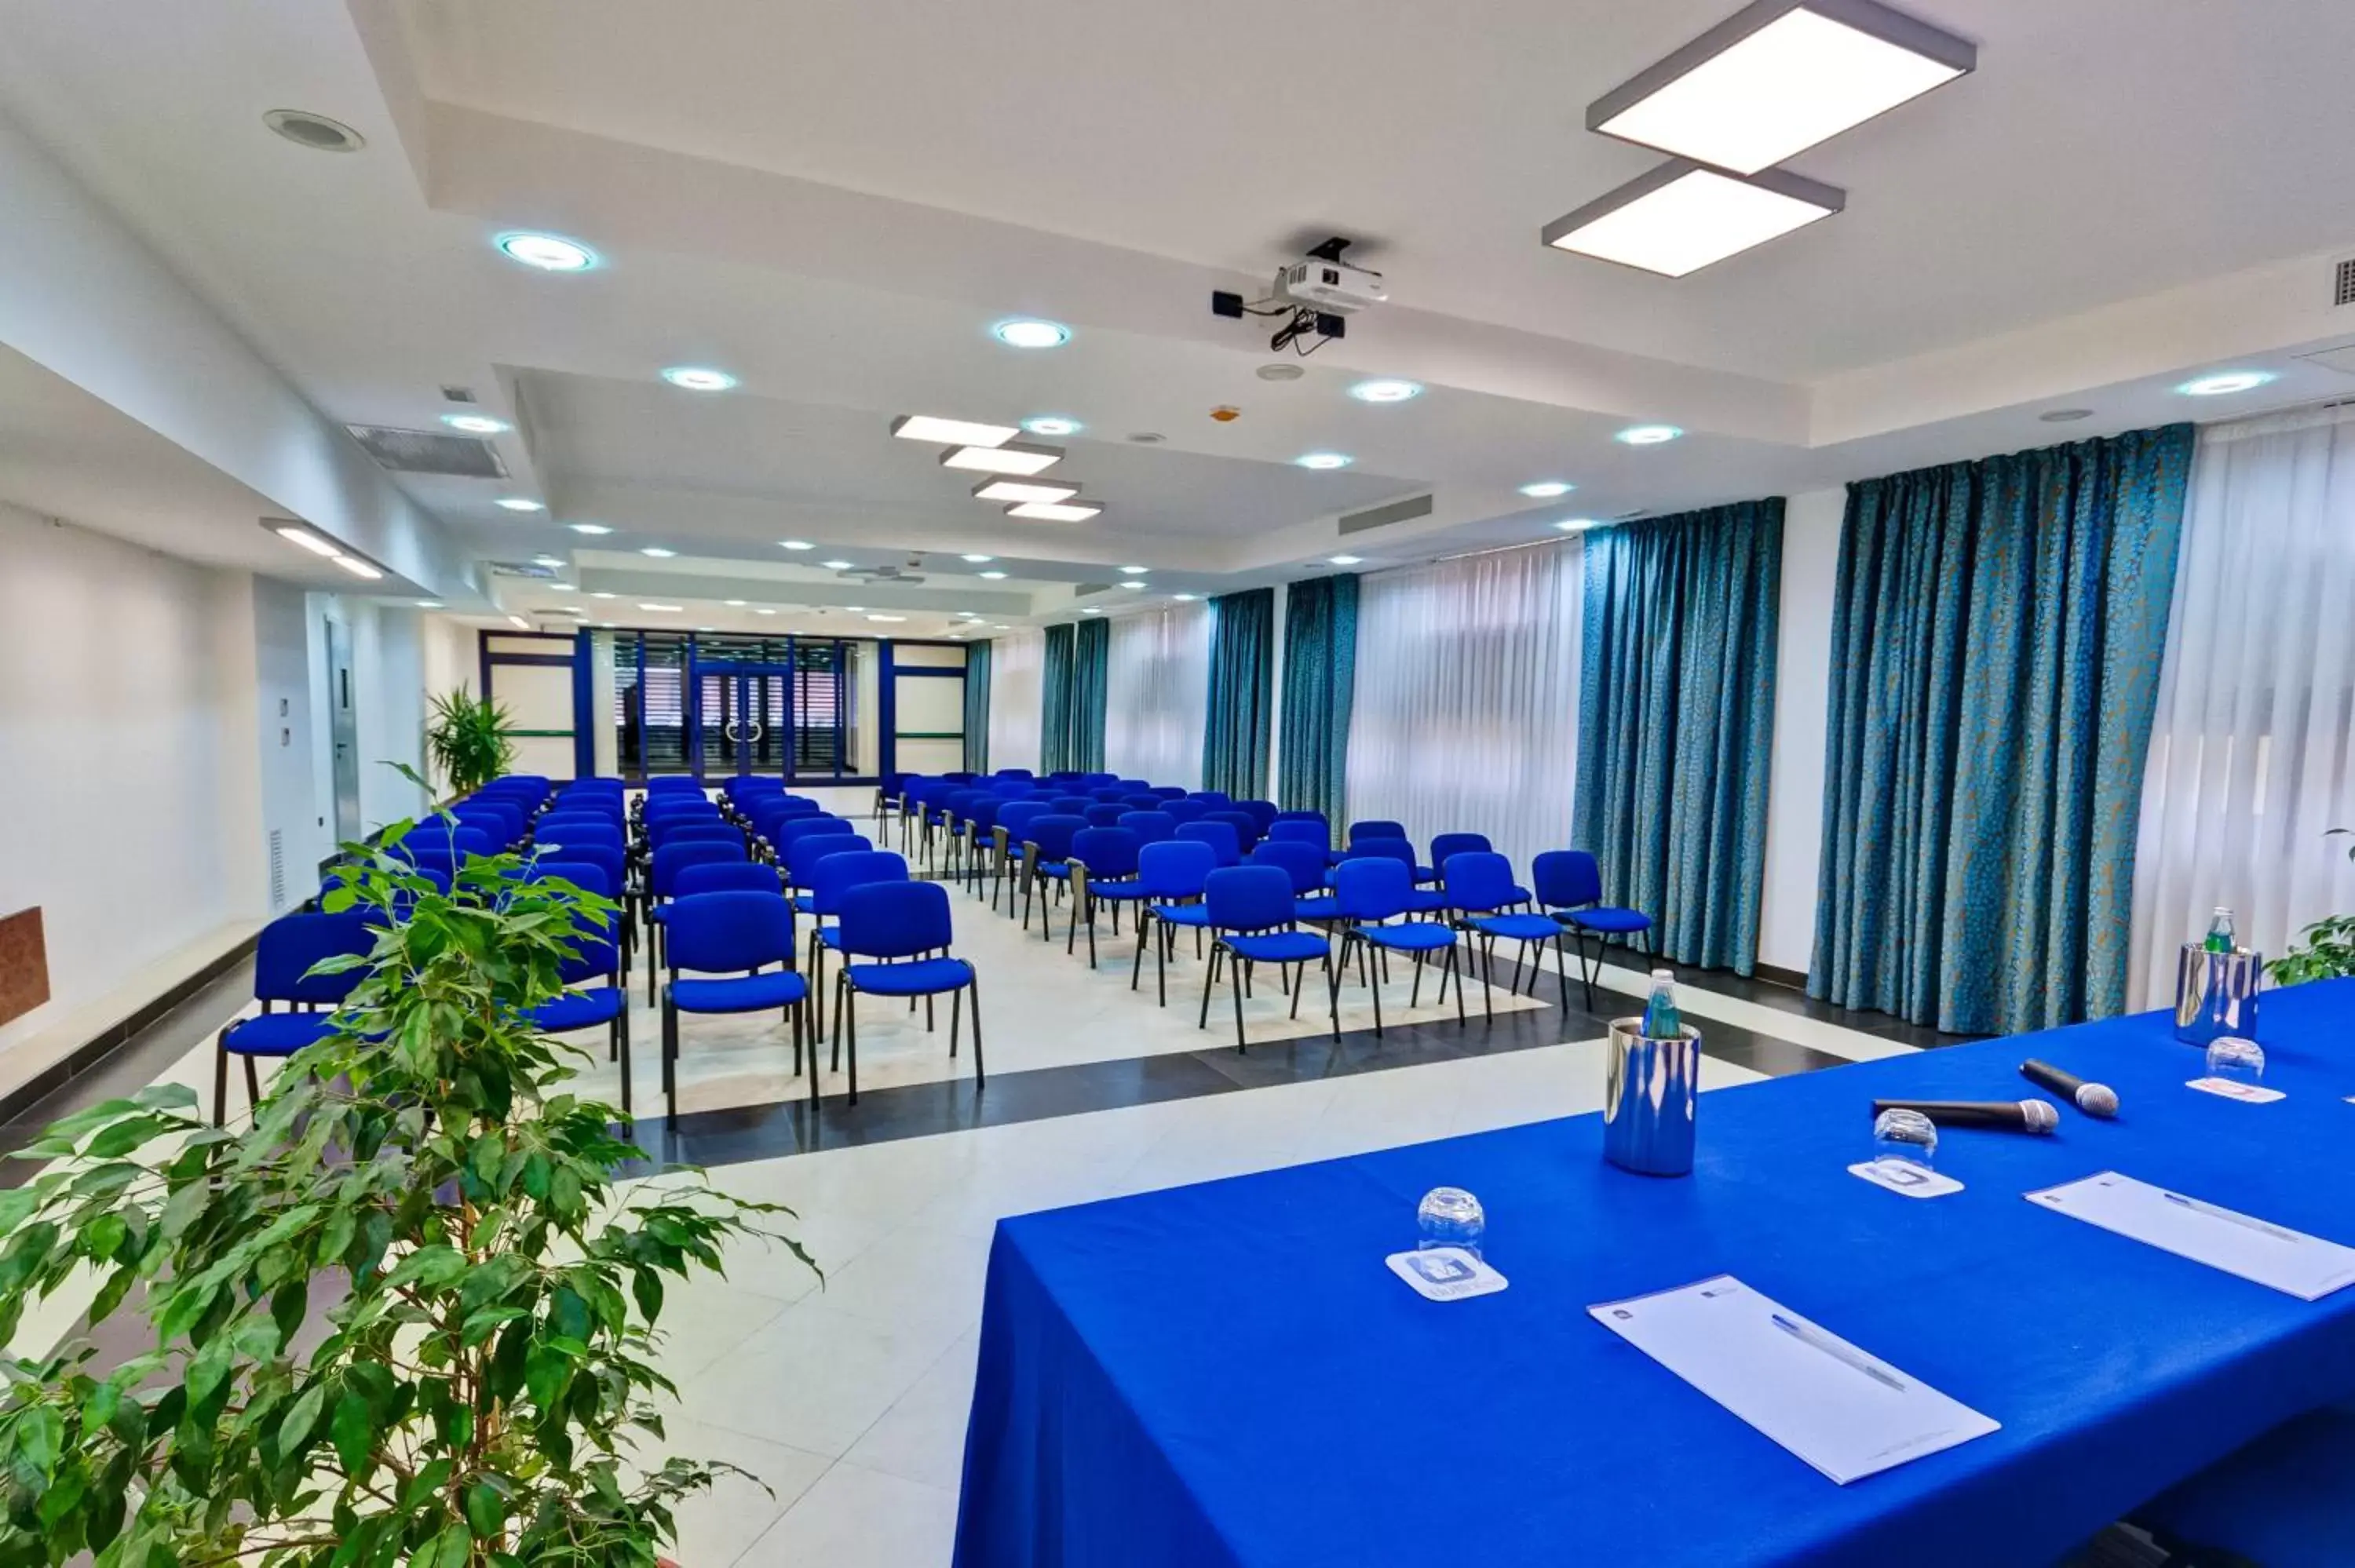 Banquet/Function facilities in Best Western Blu Hotel Roma